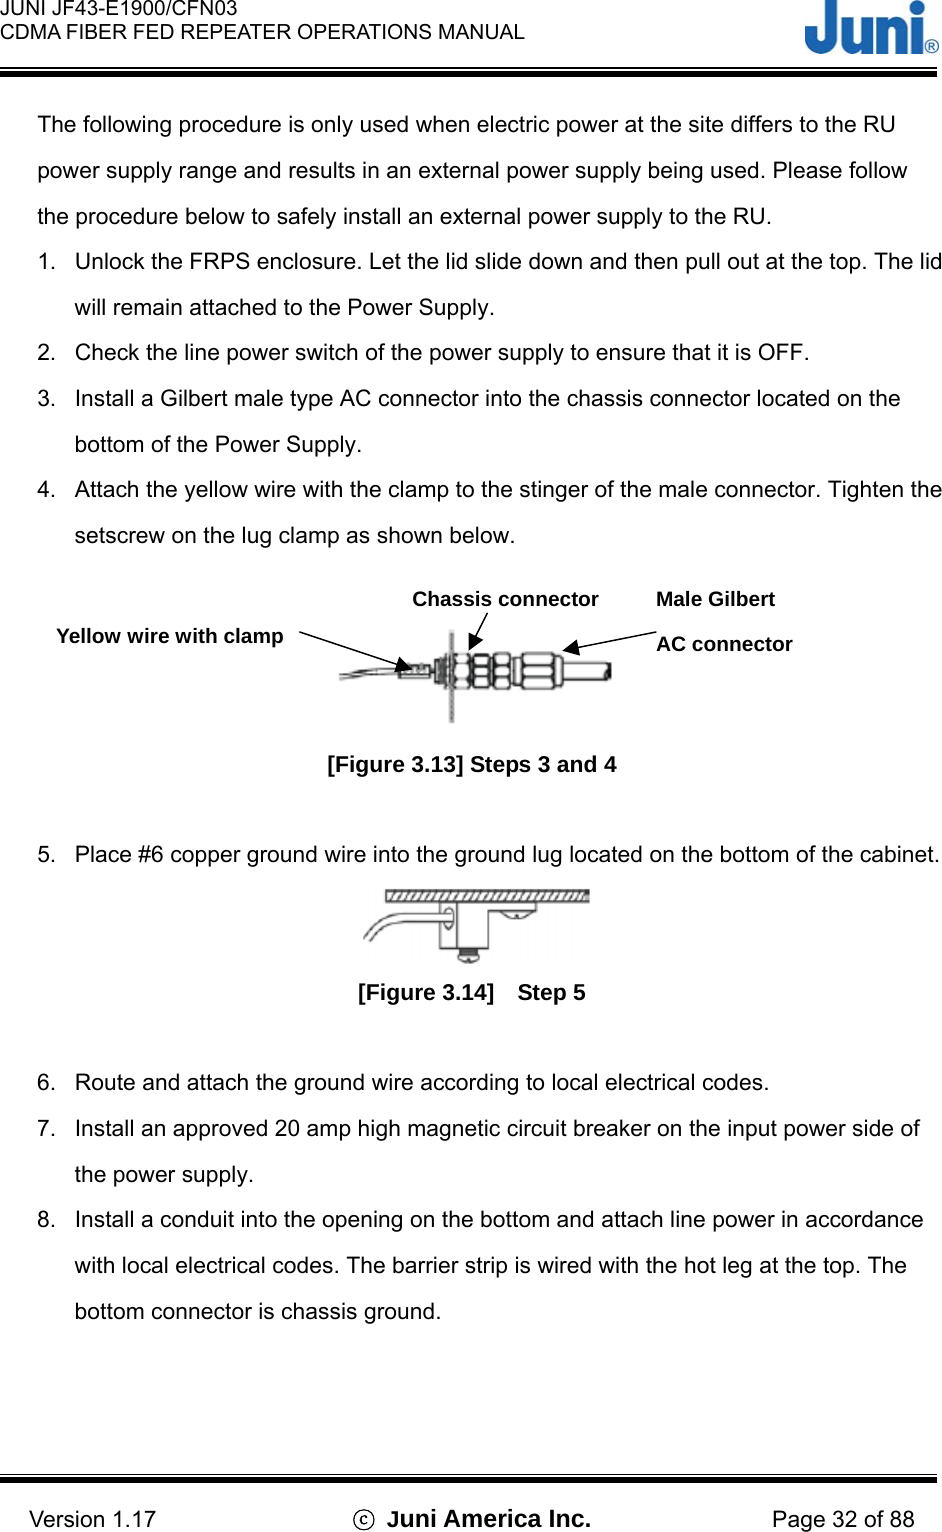  JUNI JF43-E1900/CFN03 CDMA FIBER FED REPEATER OPERATIONS MANUAL                                    Version 1.17  ⓒ Juni America Inc. Page 32 of 88 The following procedure is only used when electric power at the site differs to the RU power supply range and results in an external power supply being used. Please follow the procedure below to safely install an external power supply to the RU. 1.  Unlock the FRPS enclosure. Let the lid slide down and then pull out at the top. The lid will remain attached to the Power Supply. 2.  Check the line power switch of the power supply to ensure that it is OFF. 3.  Install a Gilbert male type AC connector into the chassis connector located on the bottom of the Power Supply. 4.  Attach the yellow wire with the clamp to the stinger of the male connector. Tighten the setscrew on the lug clamp as shown below.   [Figure 3.13] Steps 3 and 4  5.  Place #6 copper ground wire into the ground lug located on the bottom of the cabinet.  [Figure 3.14]  Step 5   6.  Route and attach the ground wire according to local electrical codes. 7.  Install an approved 20 amp high magnetic circuit breaker on the input power side of the power supply. 8.  Install a conduit into the opening on the bottom and attach line power in accordance with local electrical codes. The barrier strip is wired with the hot leg at the top. The bottom connector is chassis ground.  Male Gilbert AC connector Yellow wire with clamp Chassis connector 